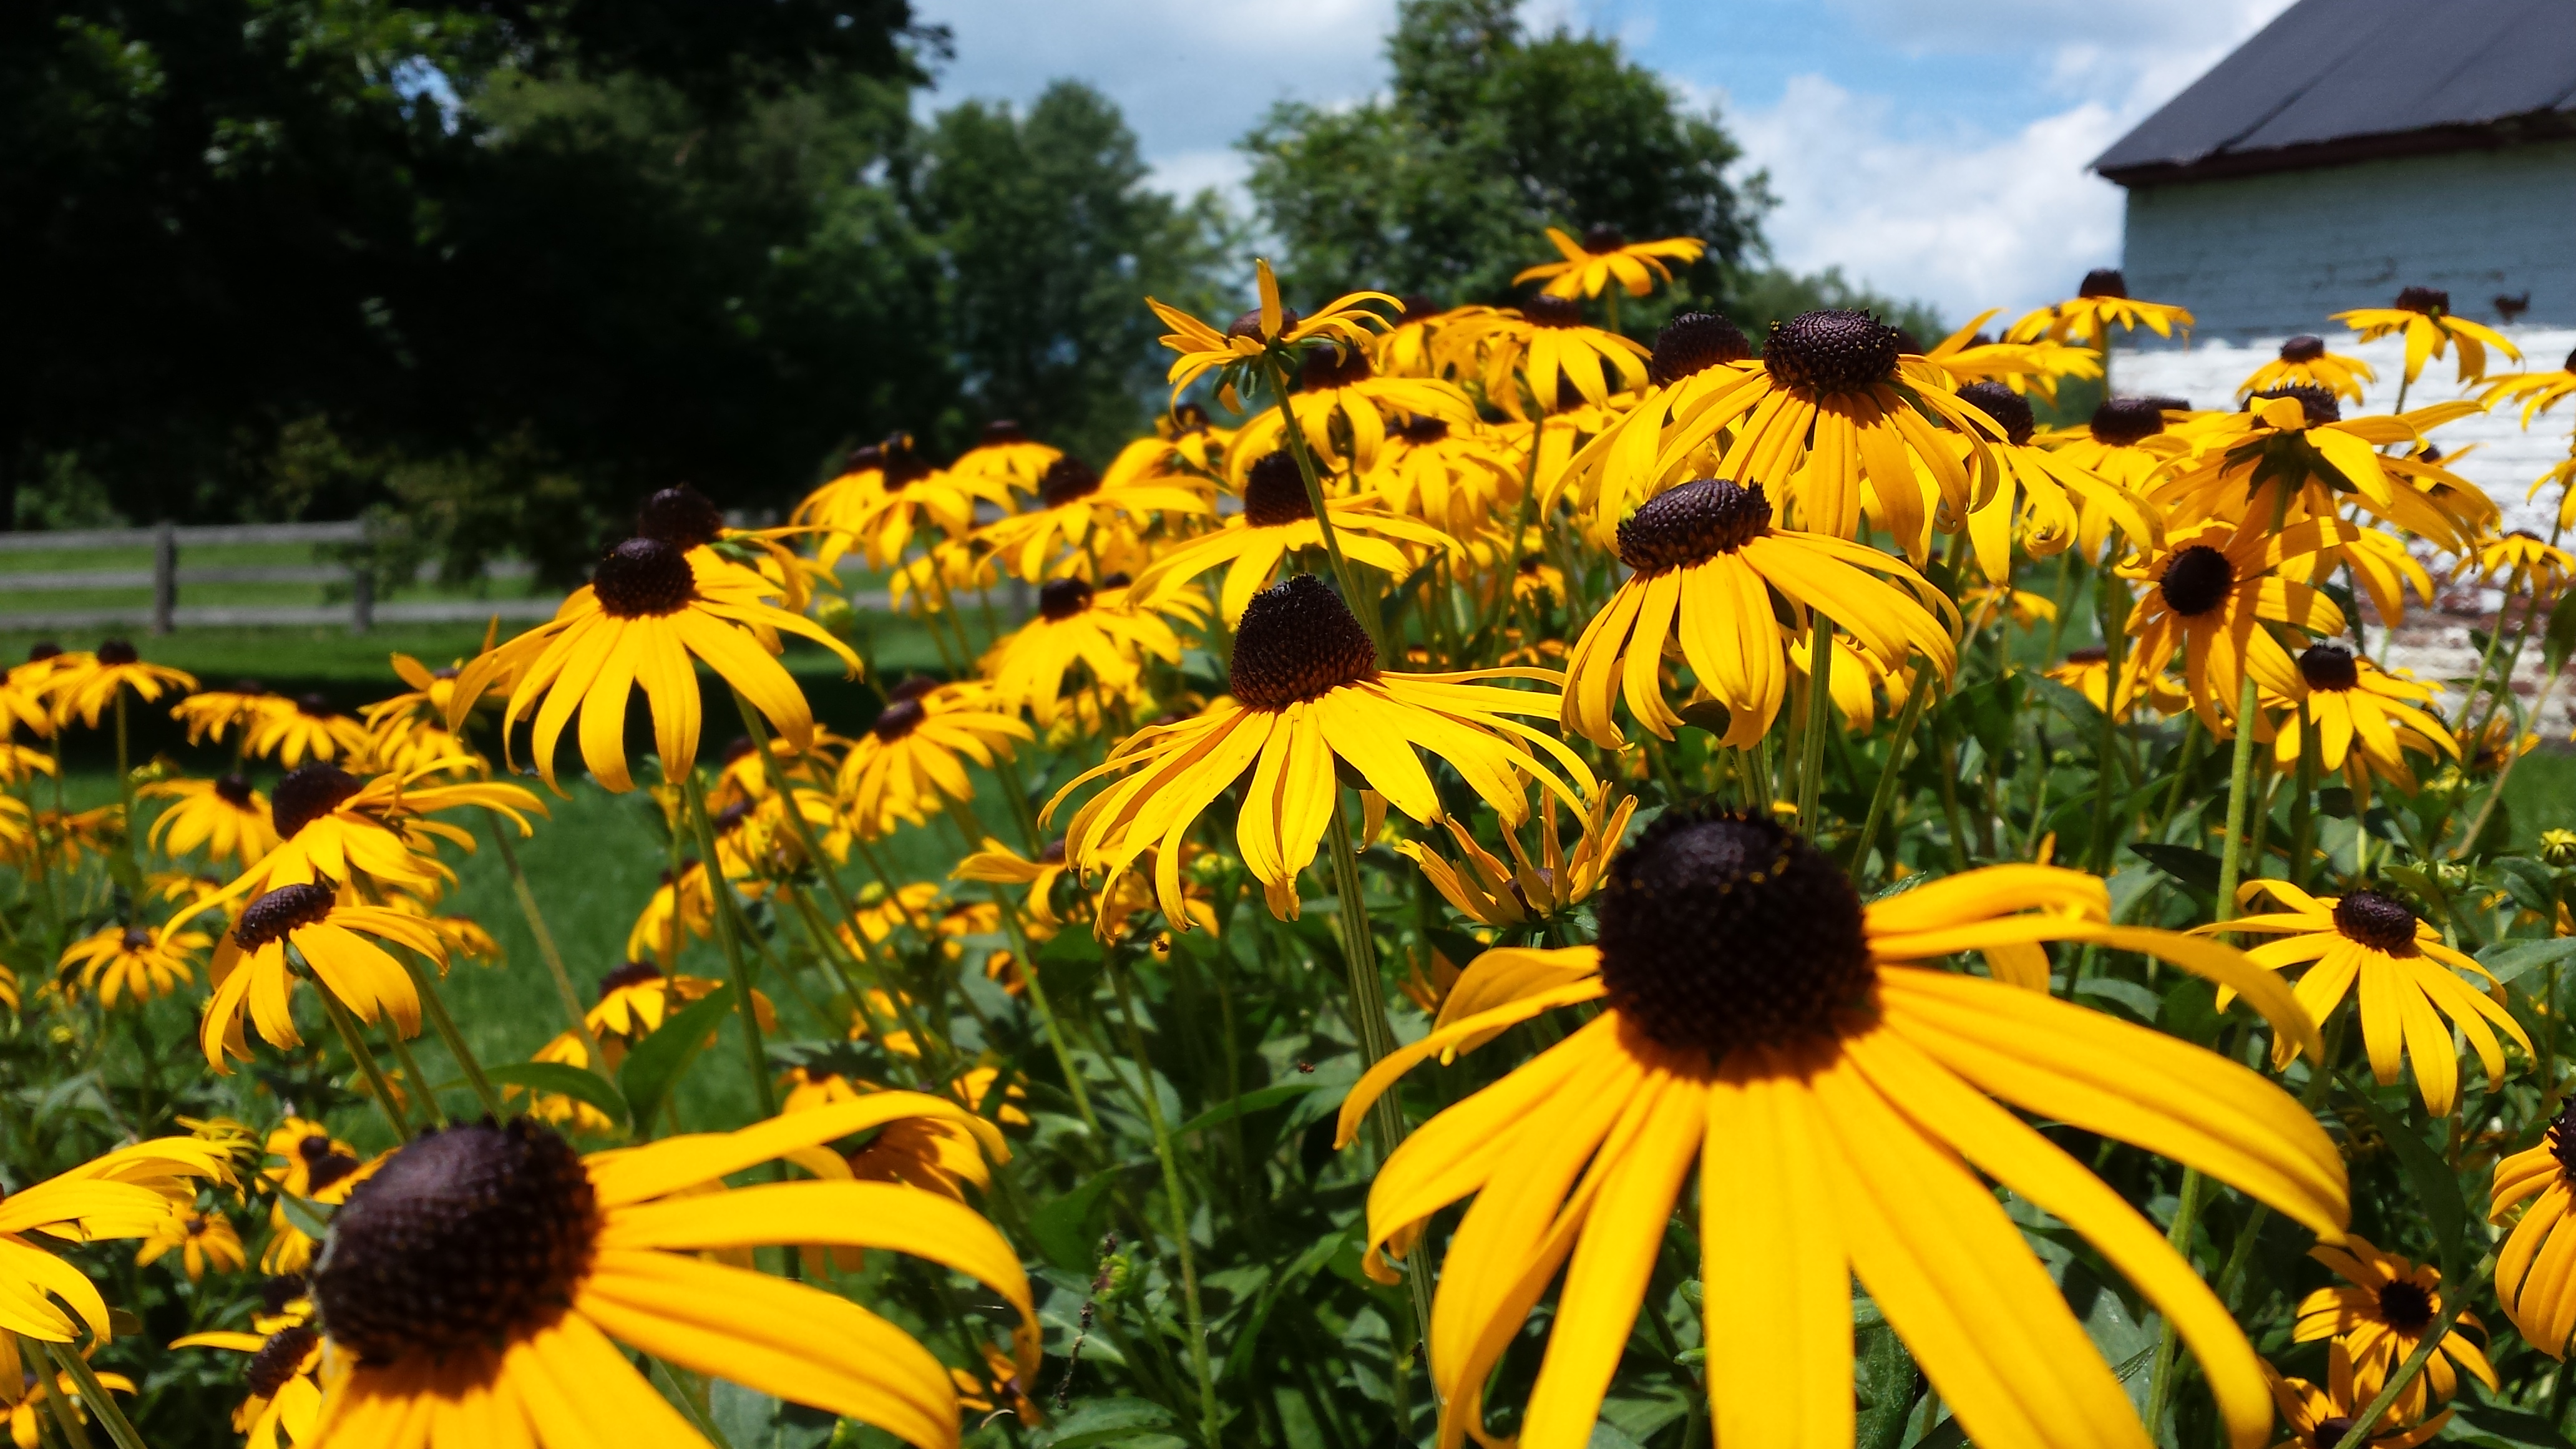 BOONSBORO REFLECTIONS: How the Black-eyed Susan Became the State Flower